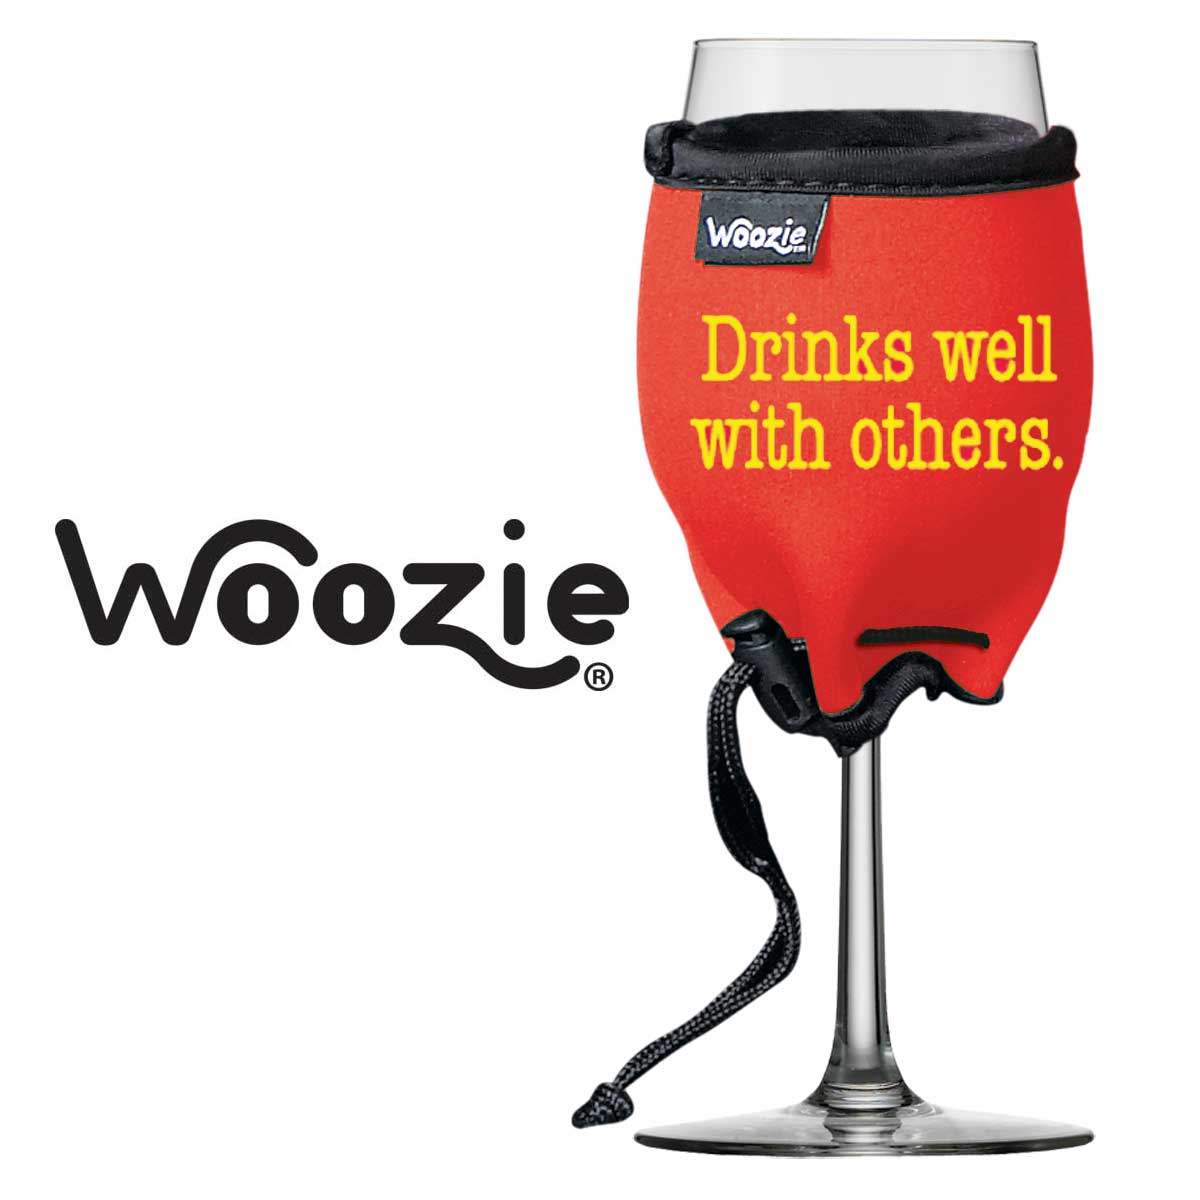 Woozie Words, Drinks Well With Others